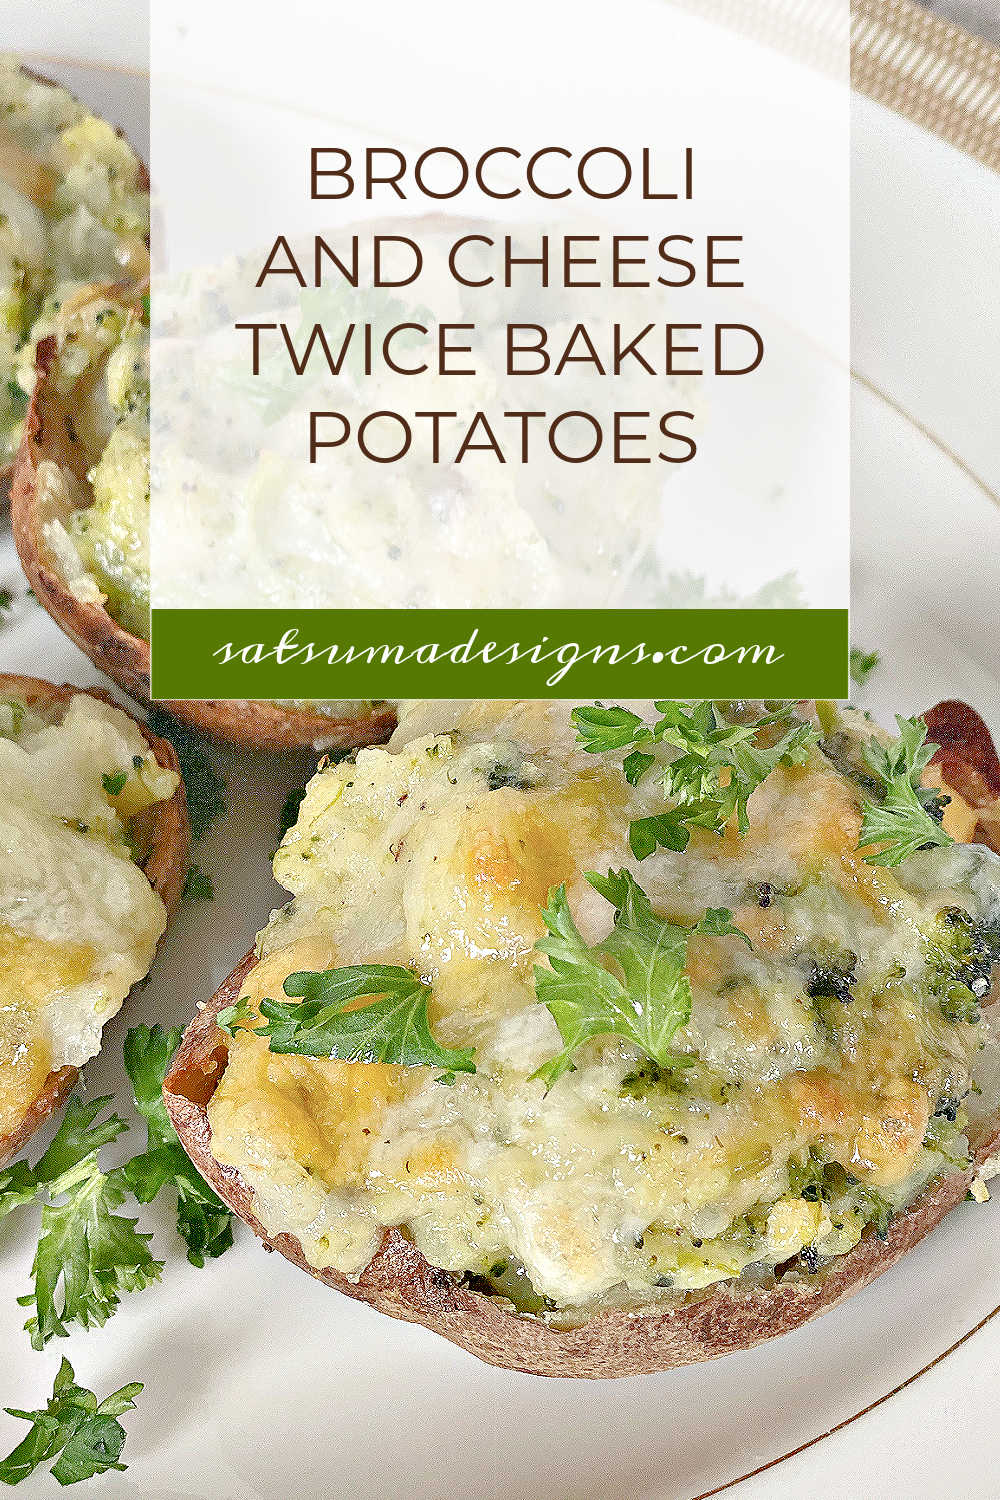 Broccoli and Cheddar Cheese Twice Baked Potatoes